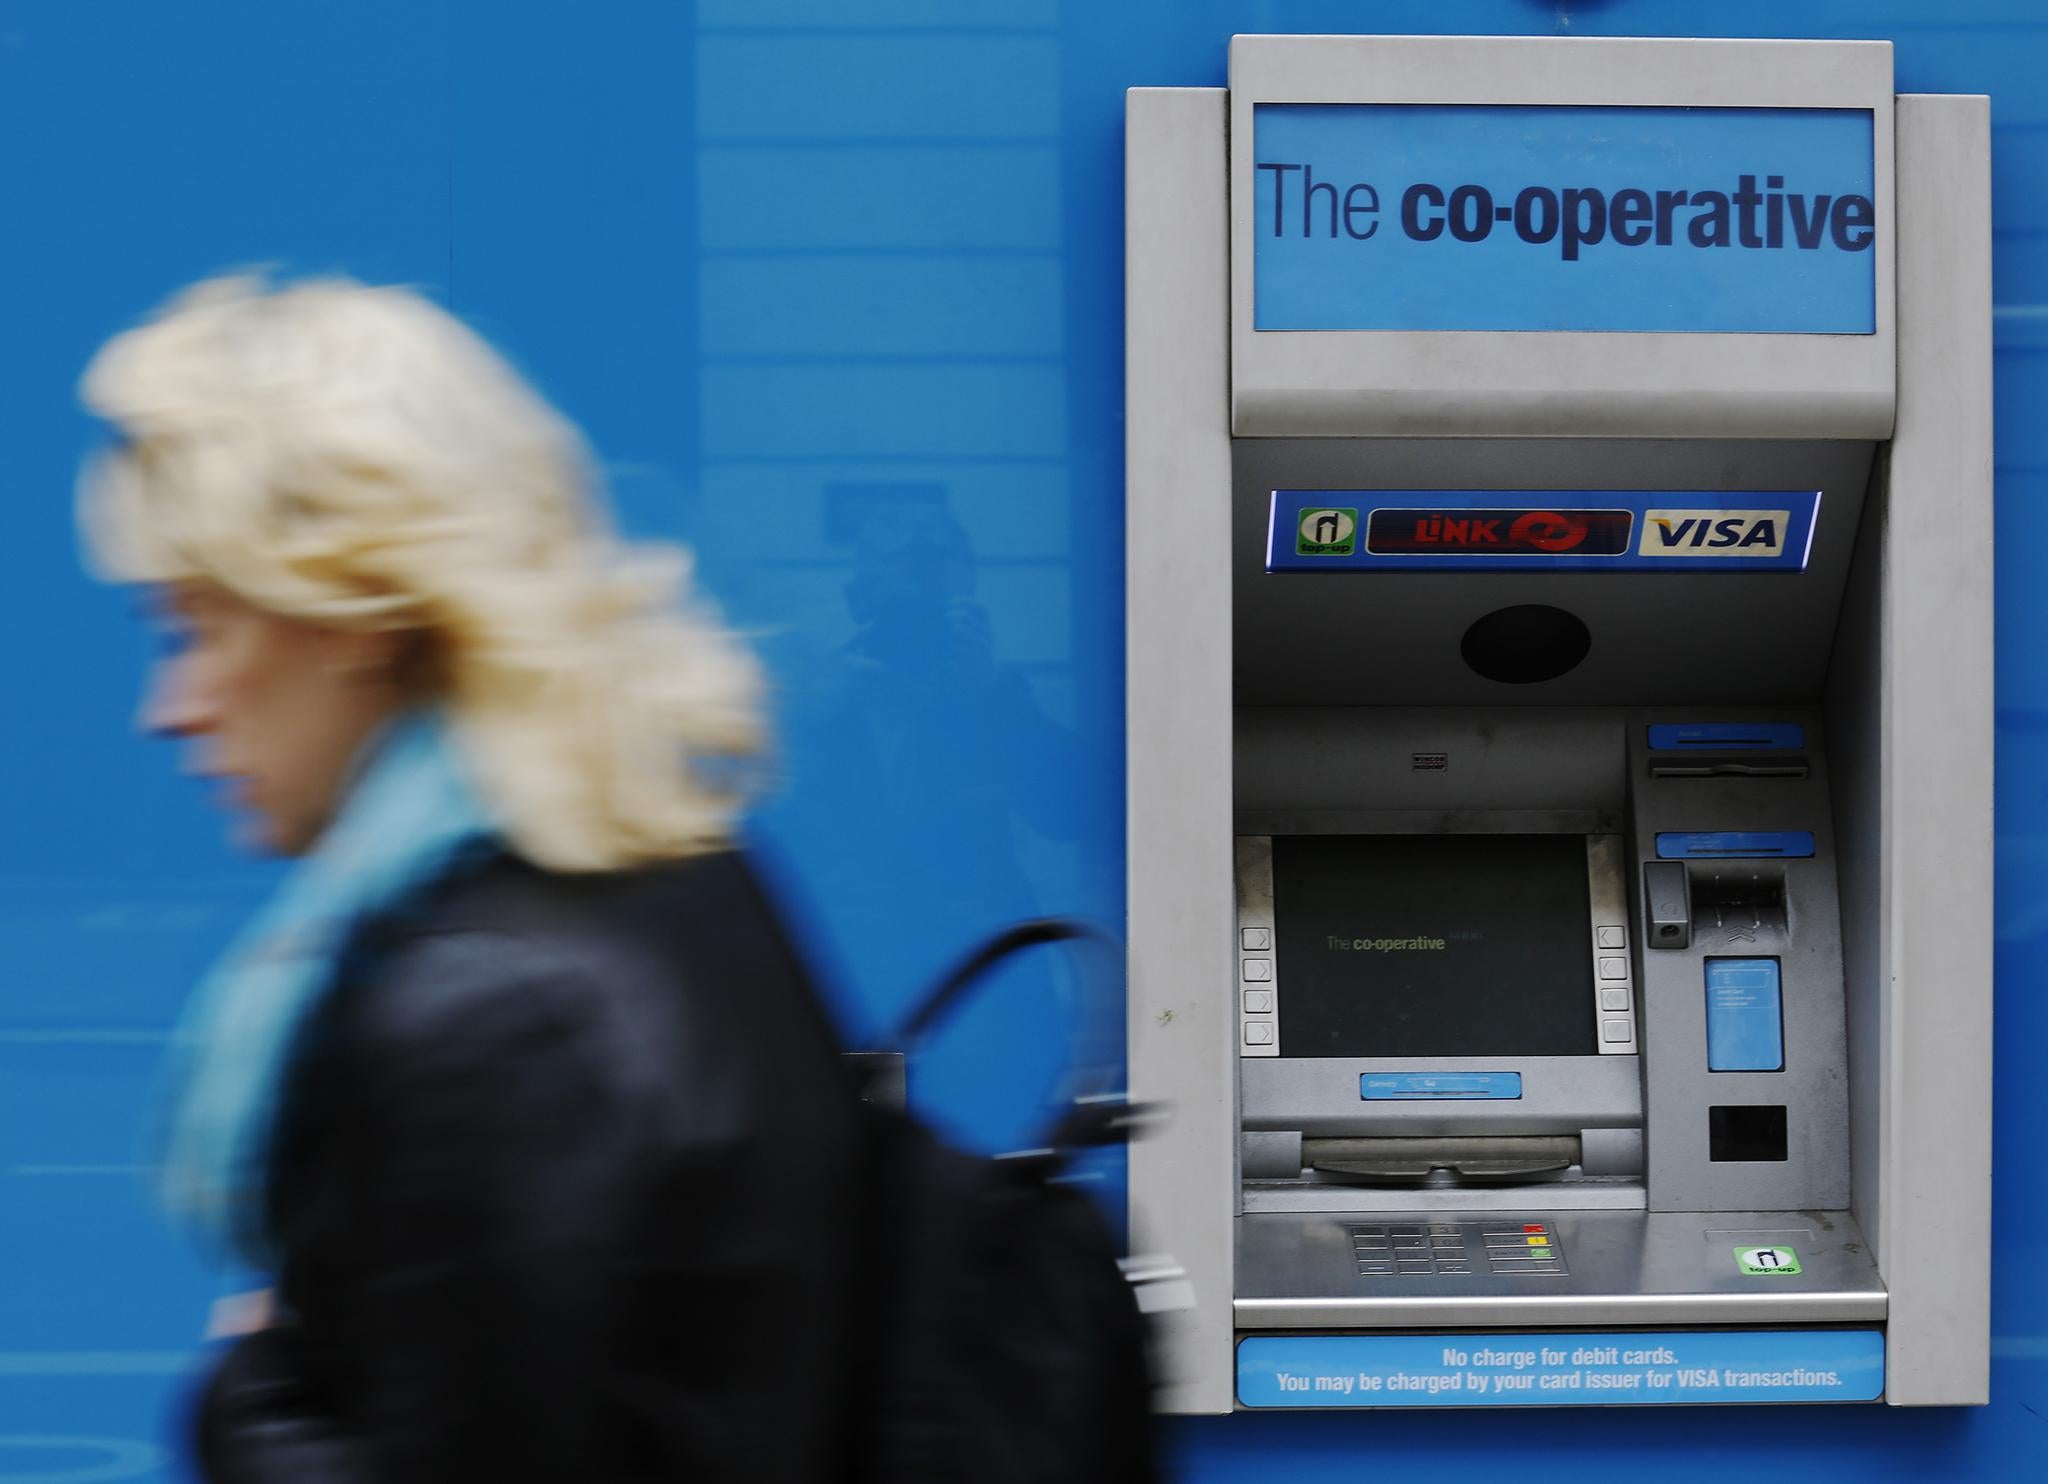 A pilot scheme with the gel has seen a 90 per cent reduction in ATM attacks